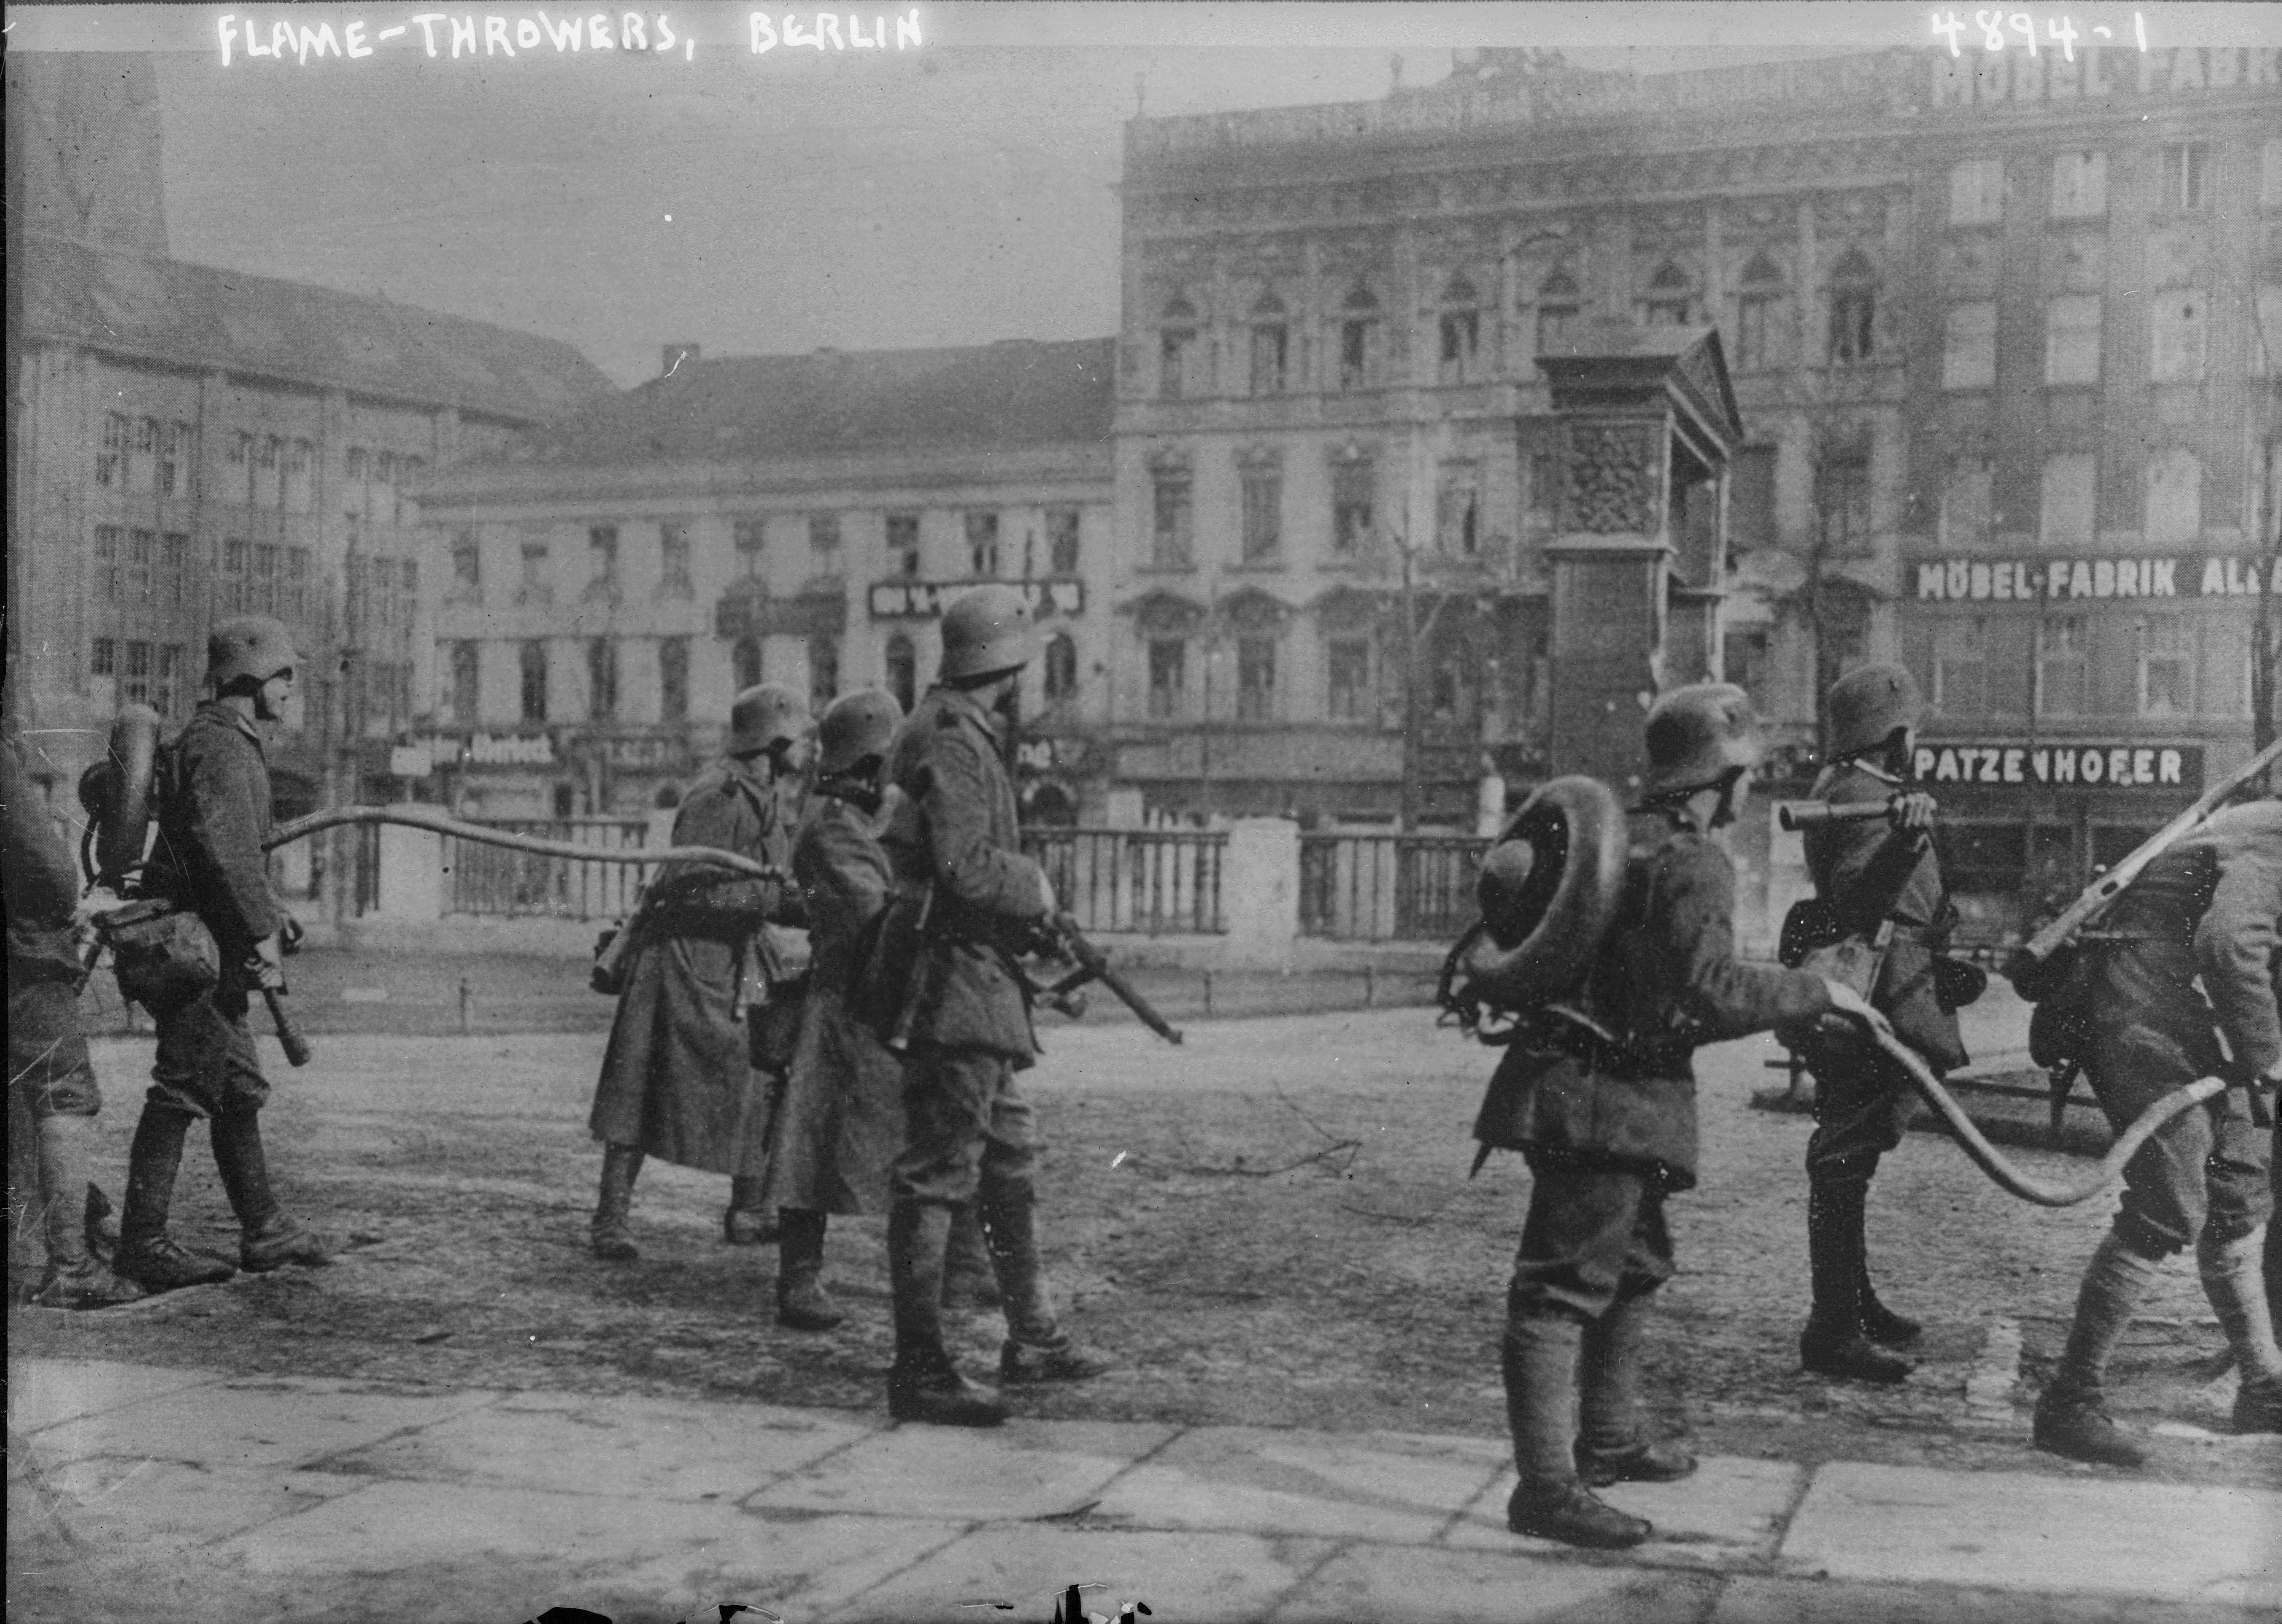 German Freikorps arraying with flamethrowers during the 1919 Spartacist revolt in Berlin